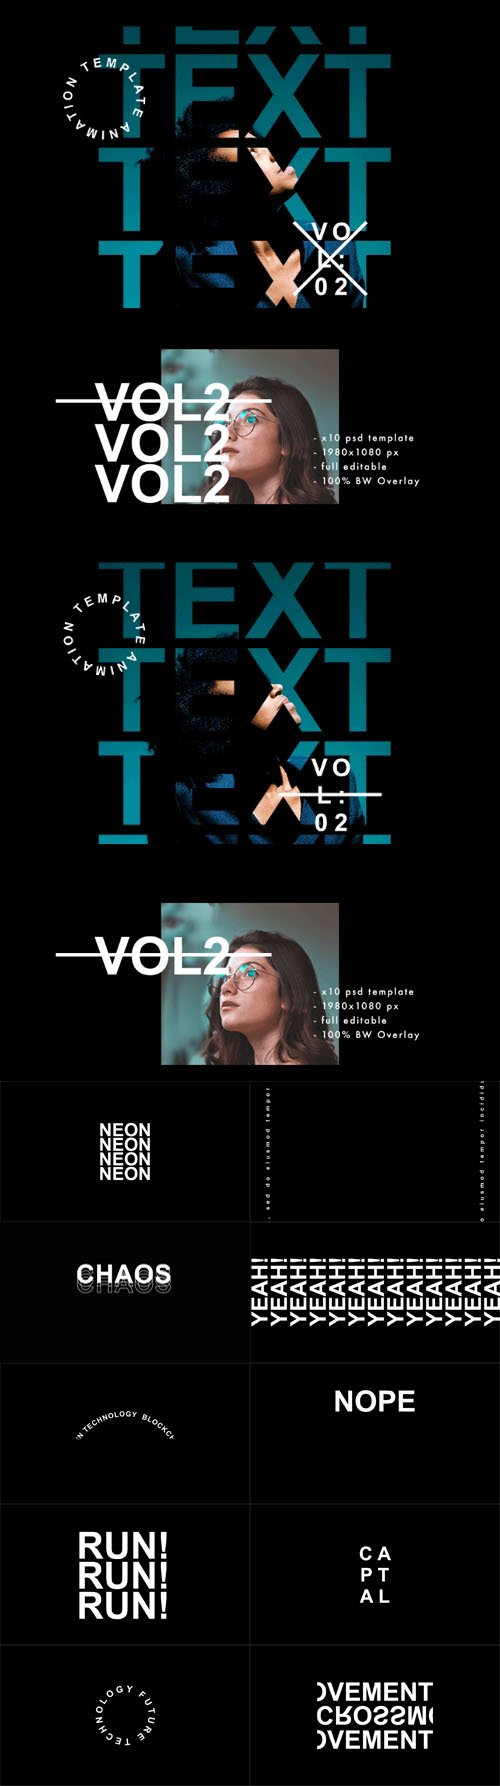 10 Text Animated Templates for Photoshop + Footages